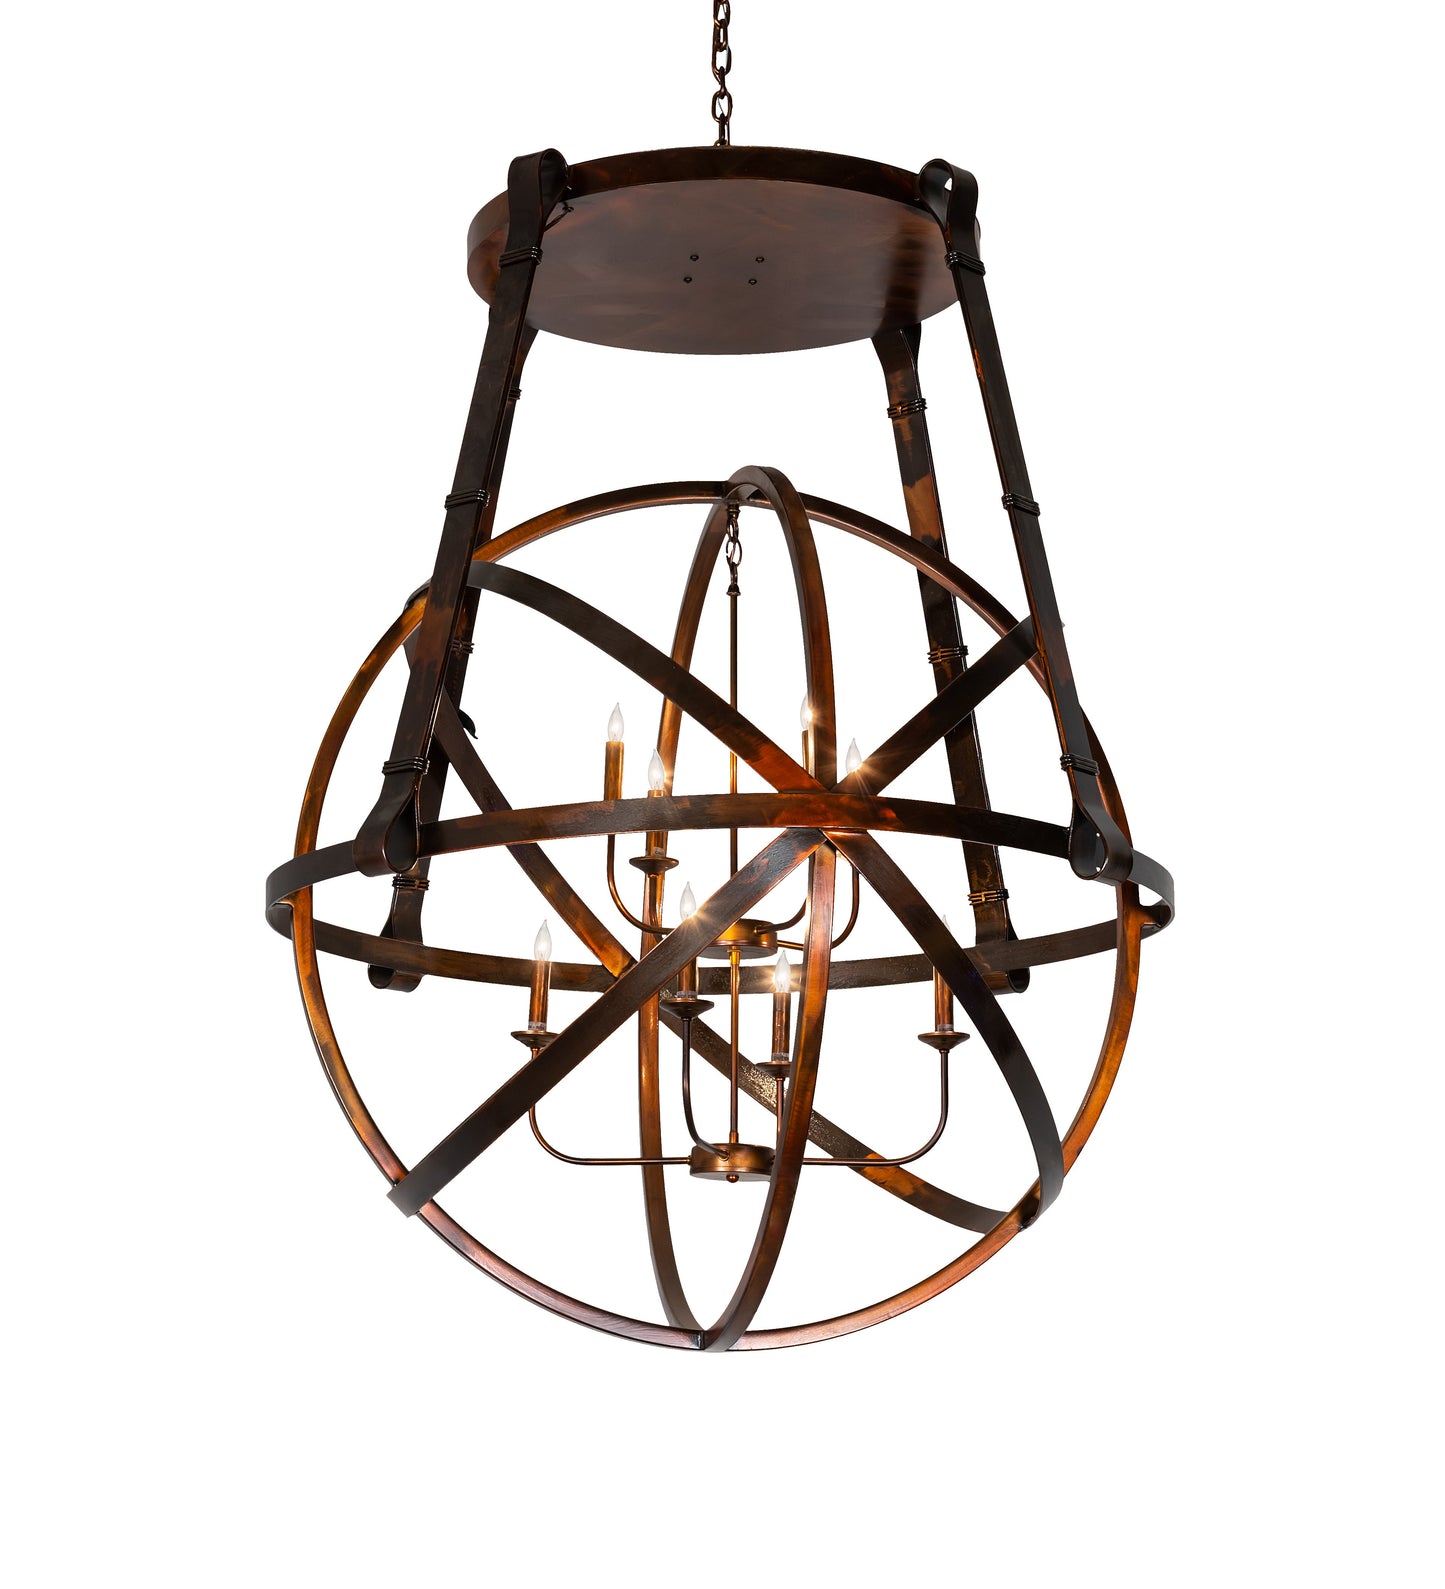 48" Gimbal Grinado Chandelier by 2nd Ave Lighting